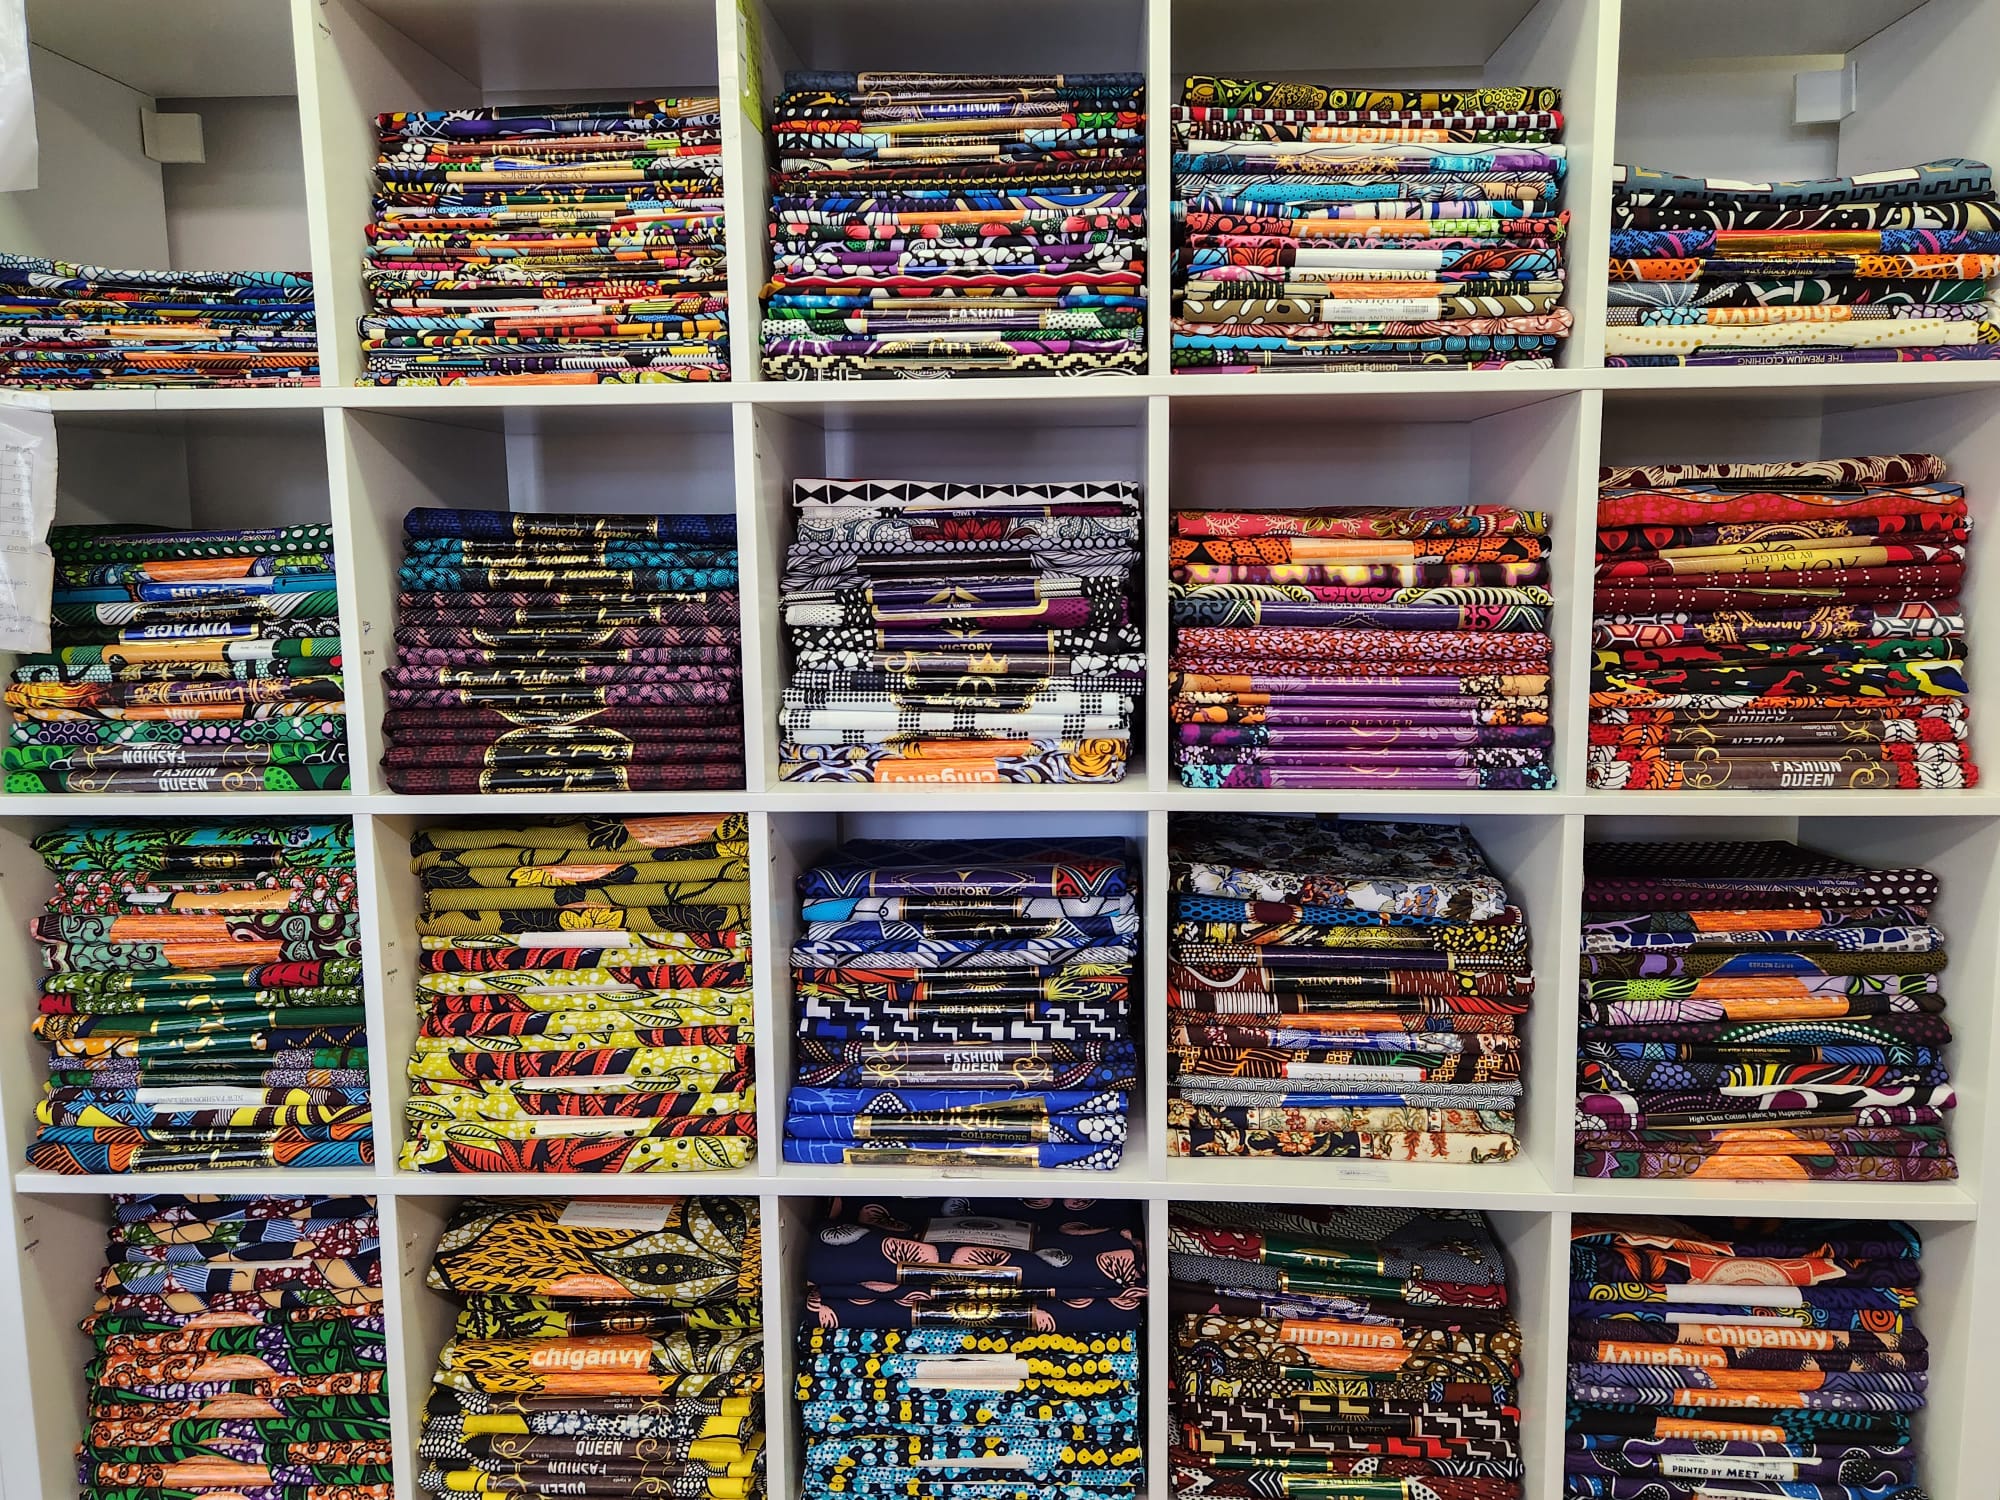 Hundreds of Colourful African Print Fabrics stacked up in shelves